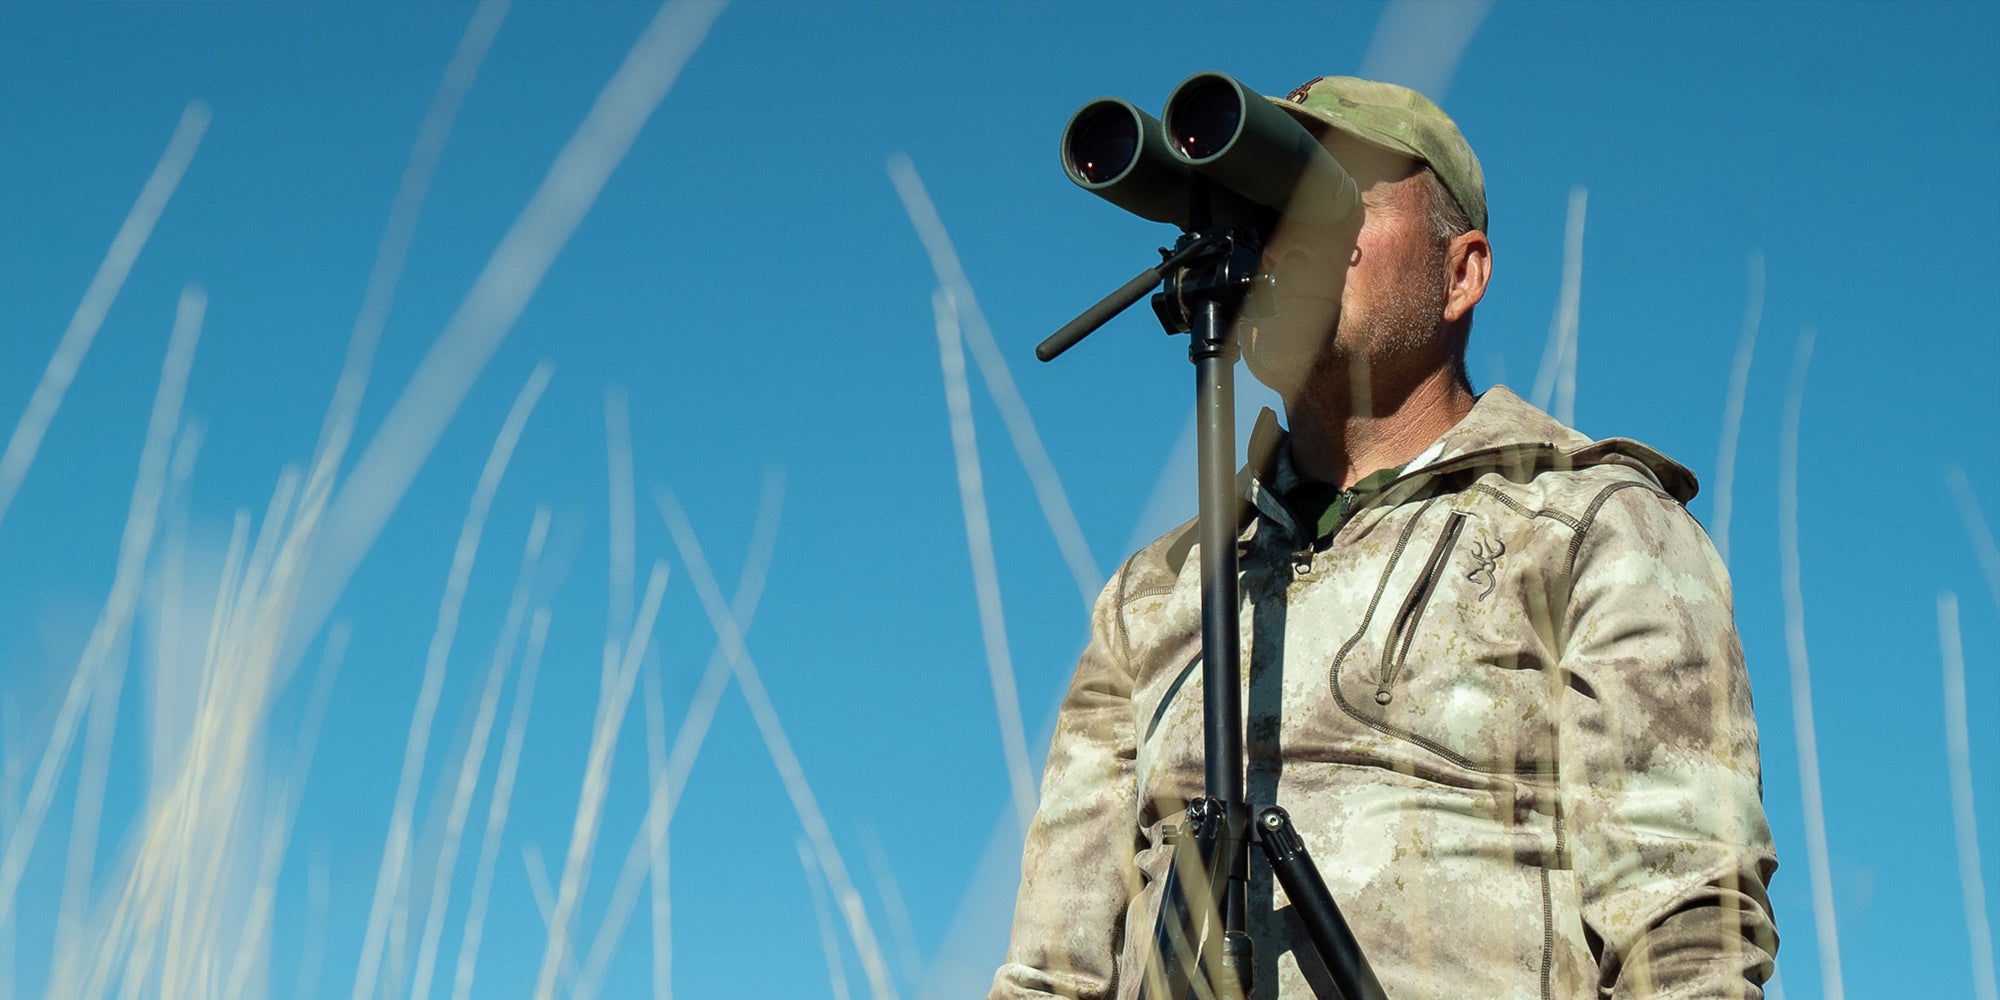 Binocular Types and When to Use Them